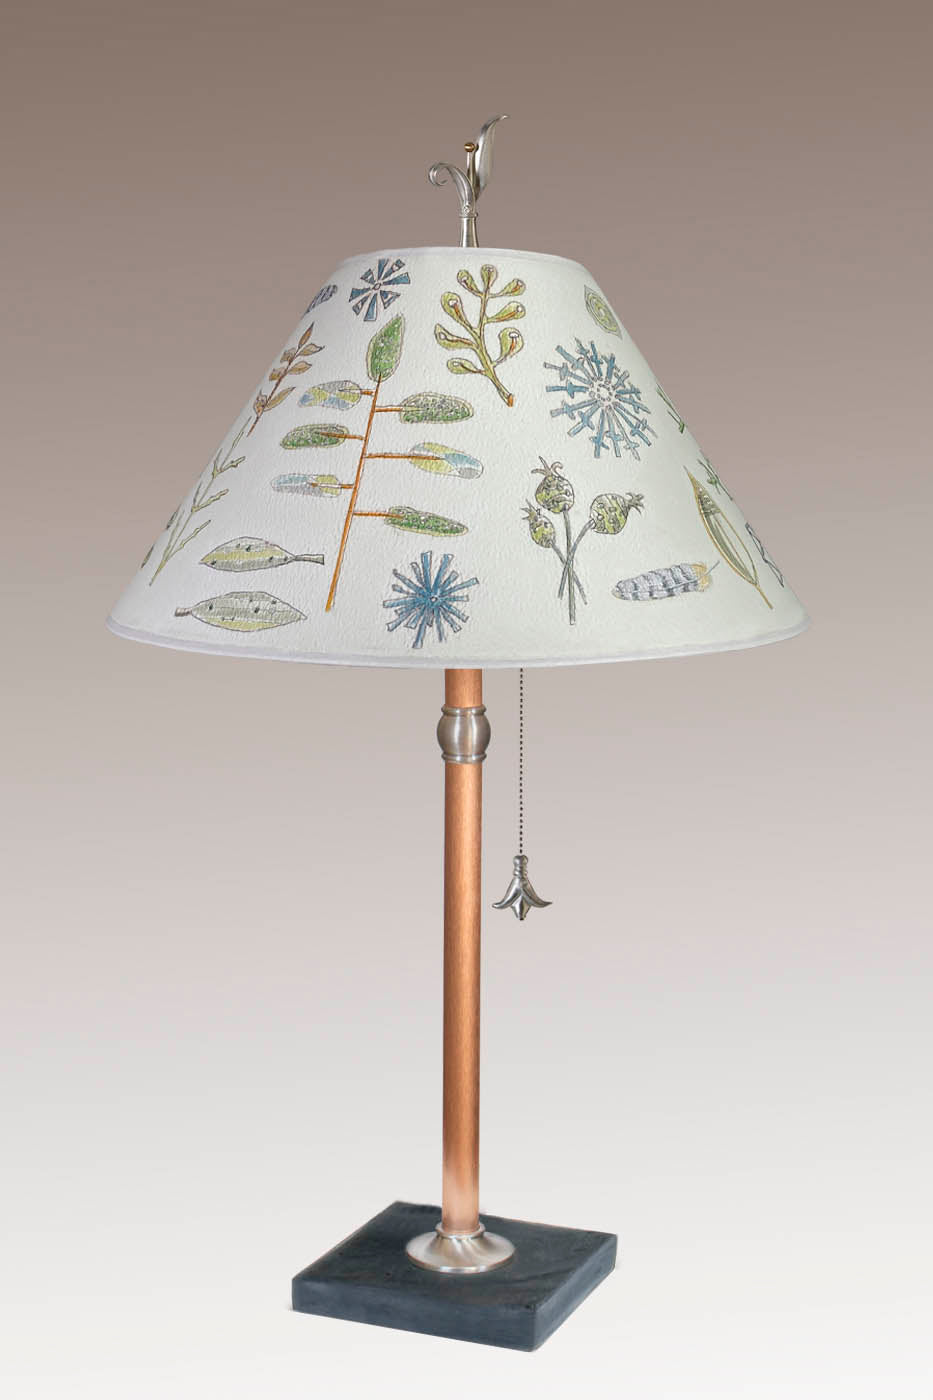 Janna Ugone &amp; Co Table Lamp Copper Table Lamp with Large Conical Shade in Field Chart